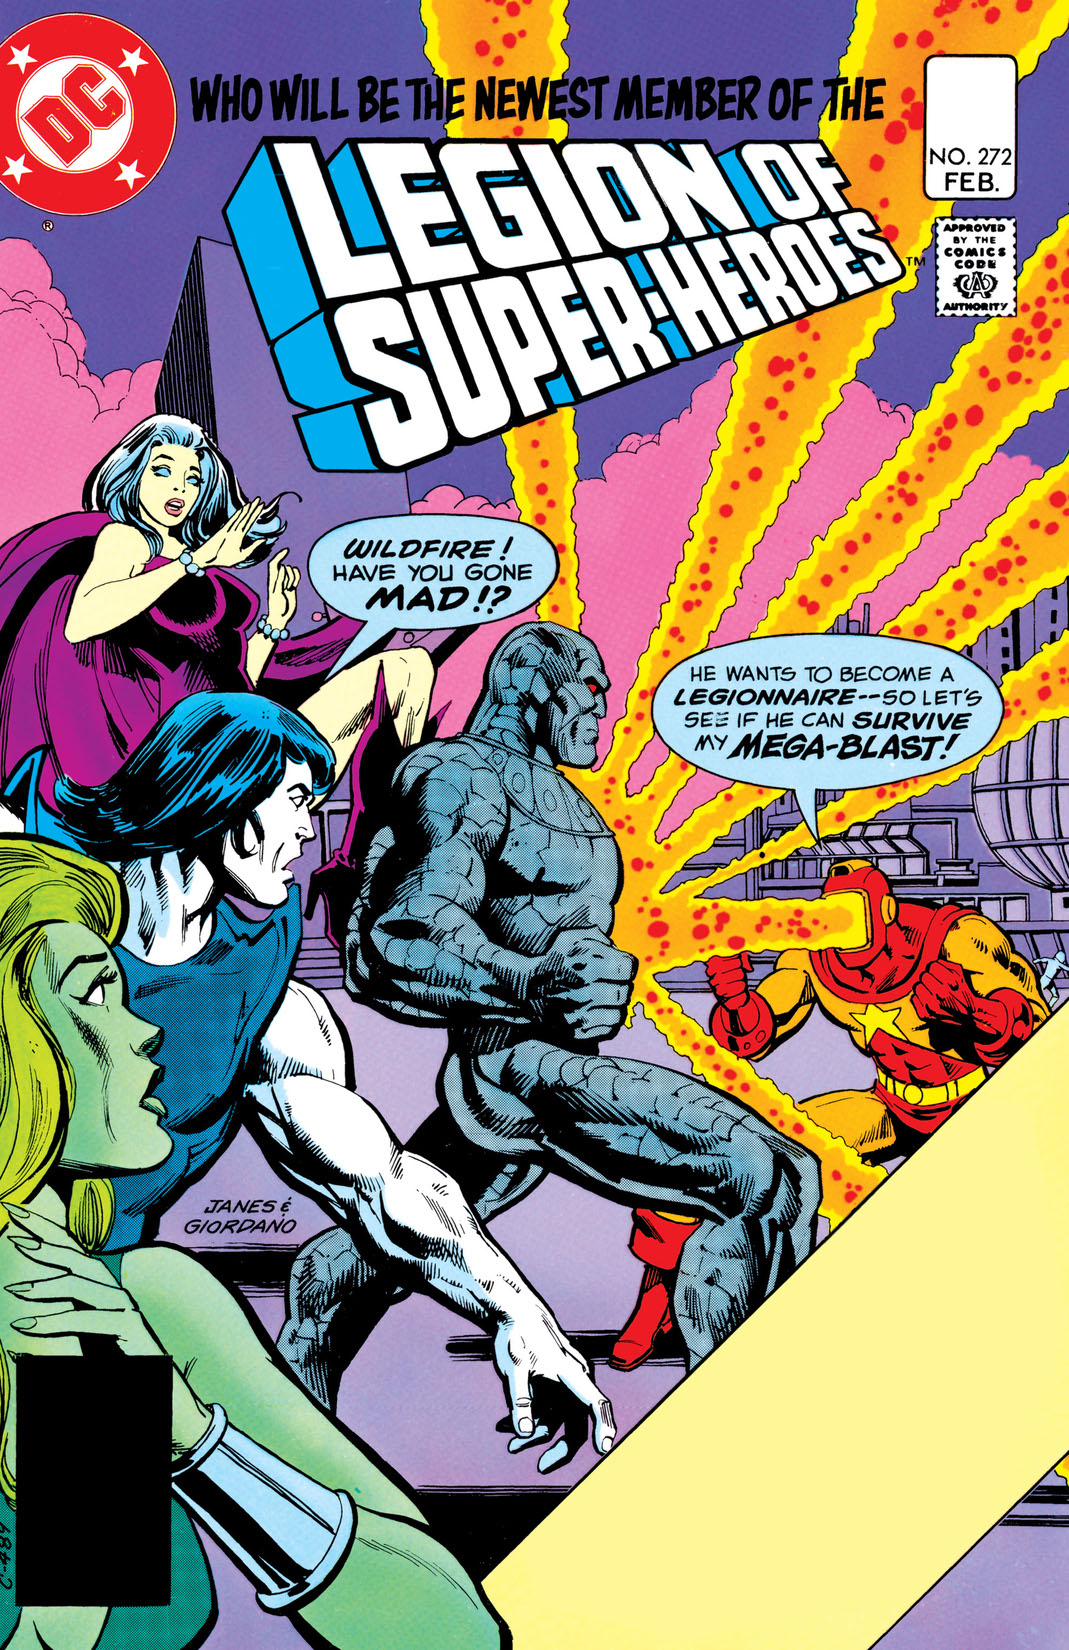 The Legion of Super-Heroes (1980-) #272 preview images